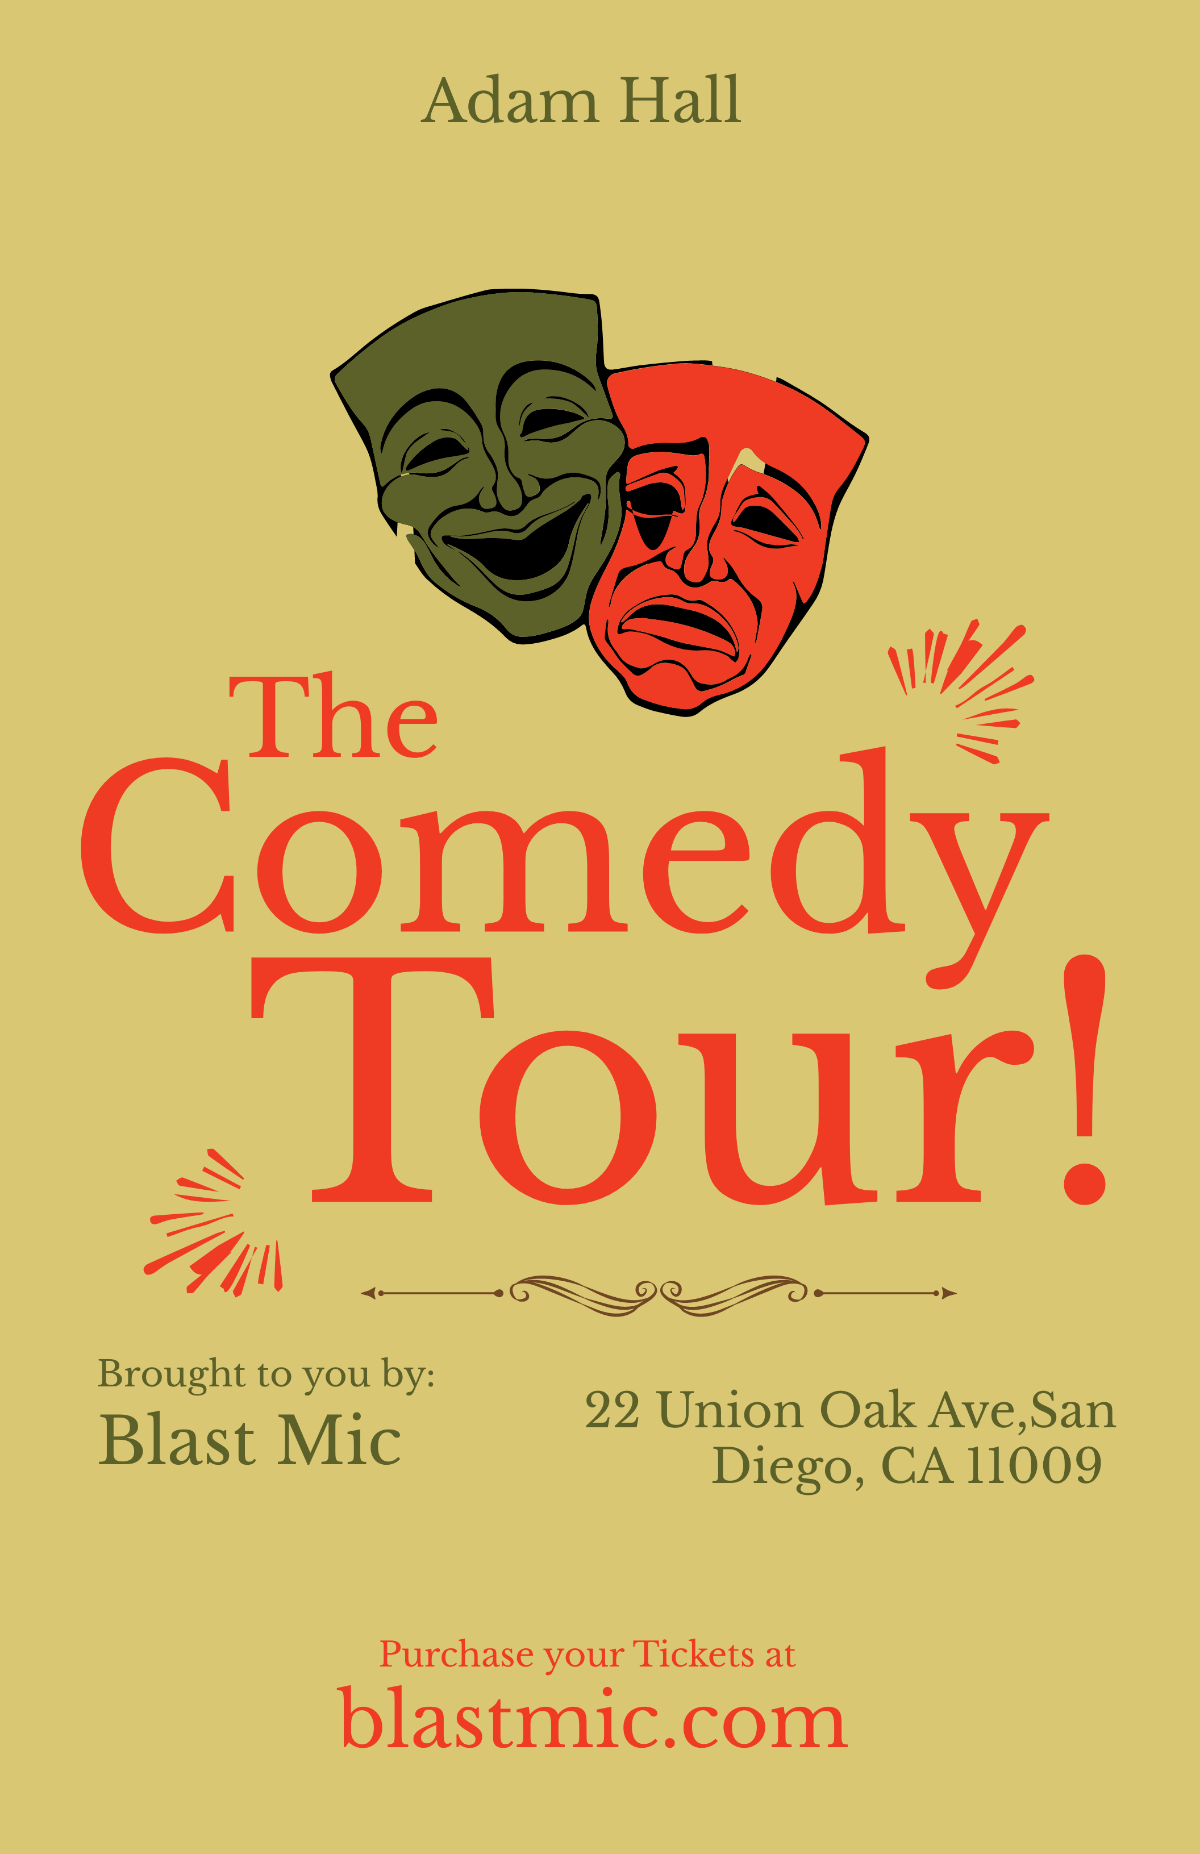 Vintage Comedy Show Poster Template